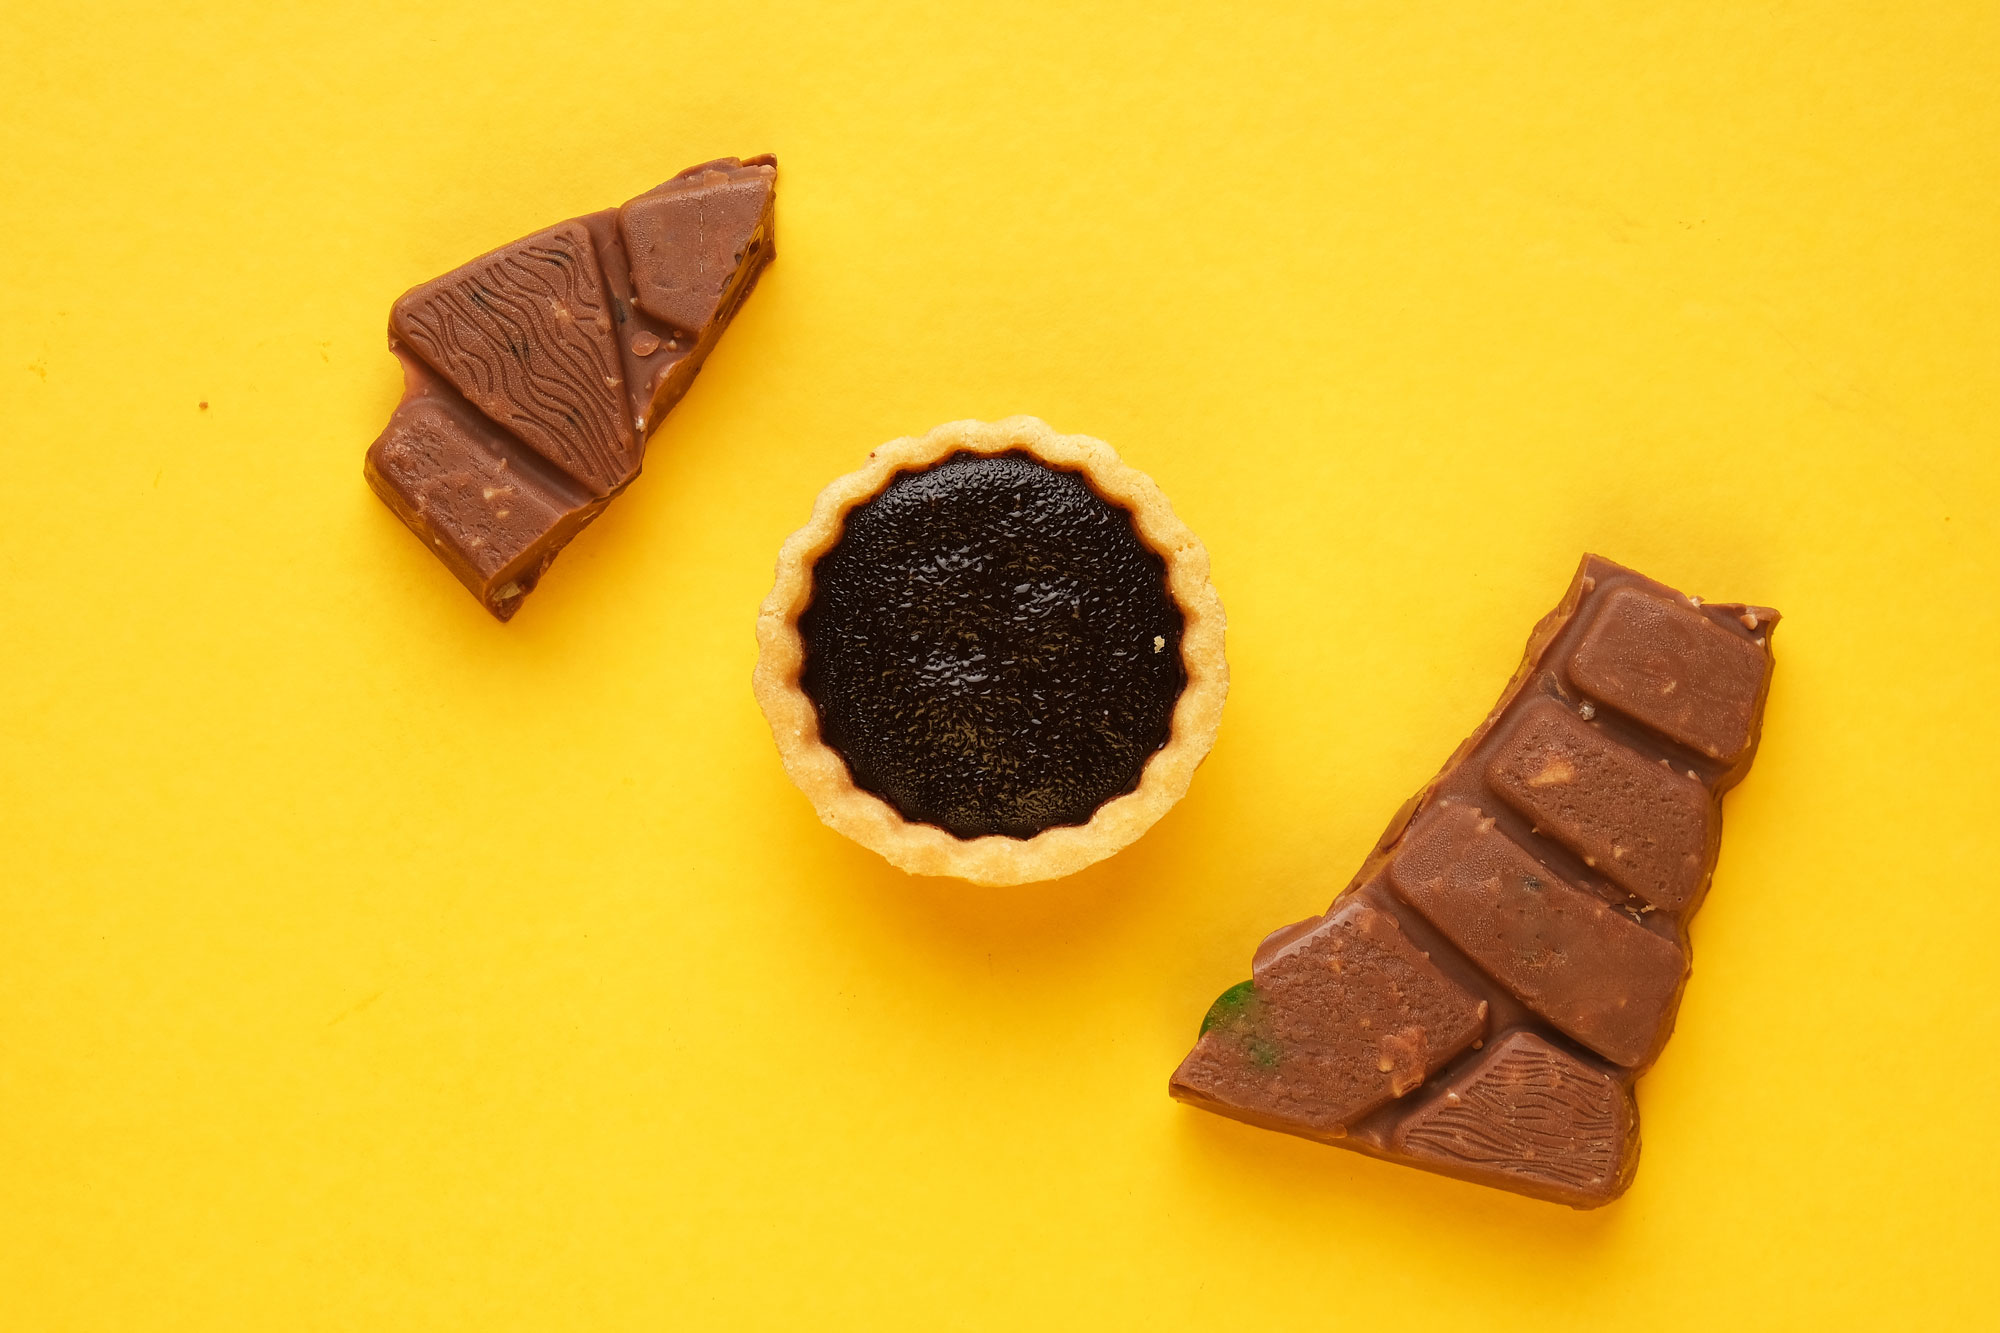 a-picture-of-4-chocolate-tart-and-bar-on-yellow-ba-2022-05-18-07-19-27-utc